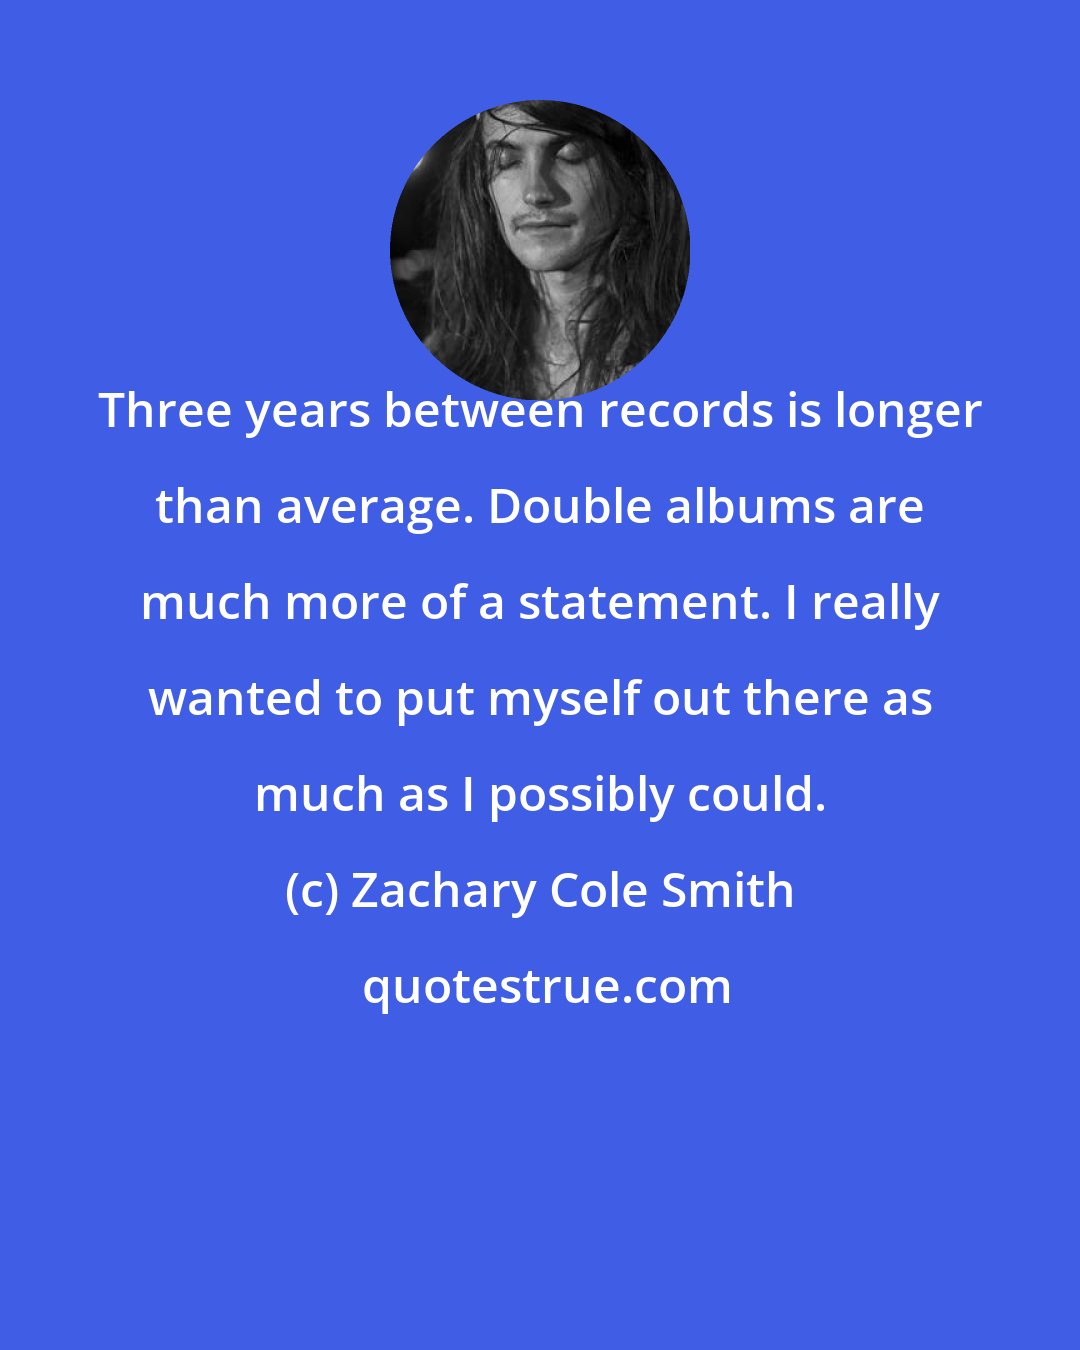 Zachary Cole Smith: Three years between records is longer than average. Double albums are much more of a statement. I really wanted to put myself out there as much as I possibly could.